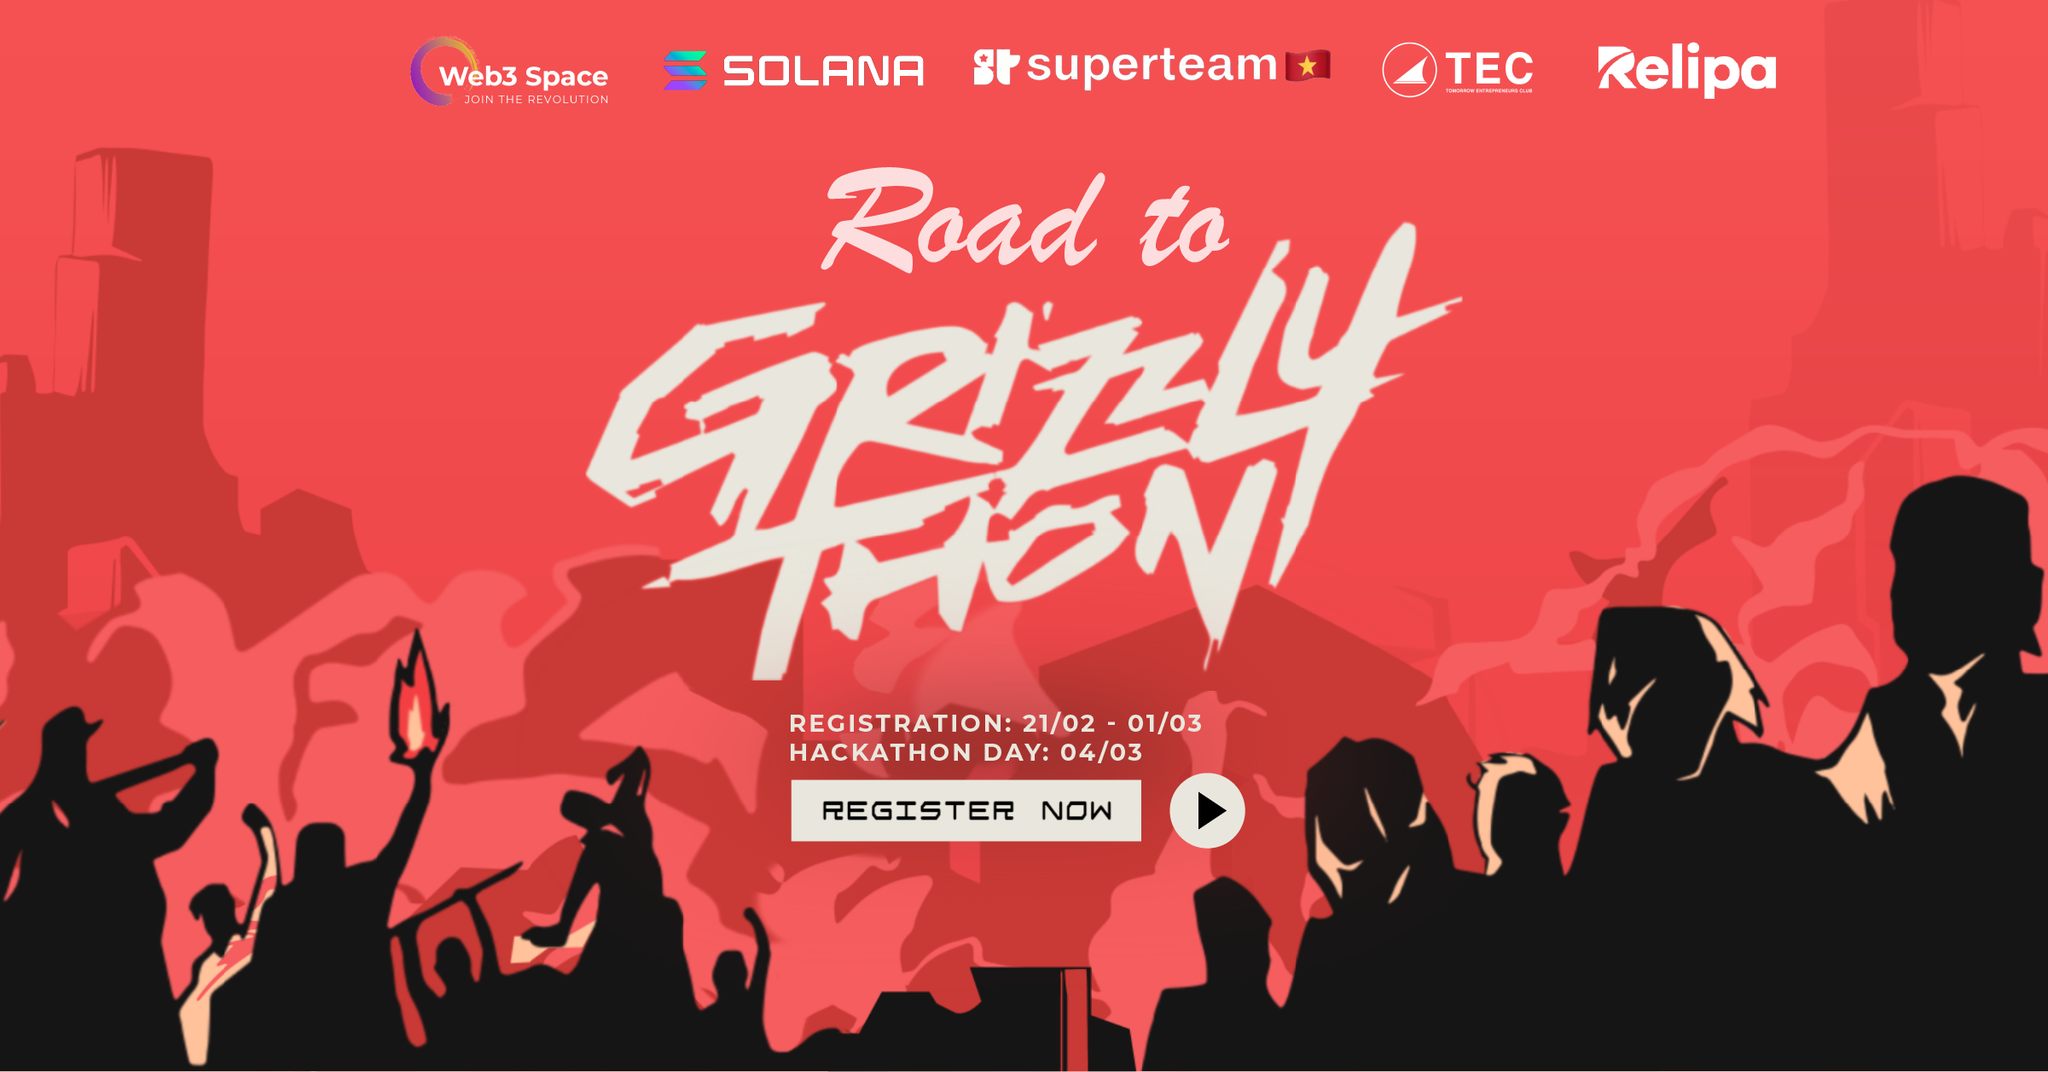 Relipa and “ROAD TO GRIZZLYTHON” HACKATHON - A Hackathon of the Future